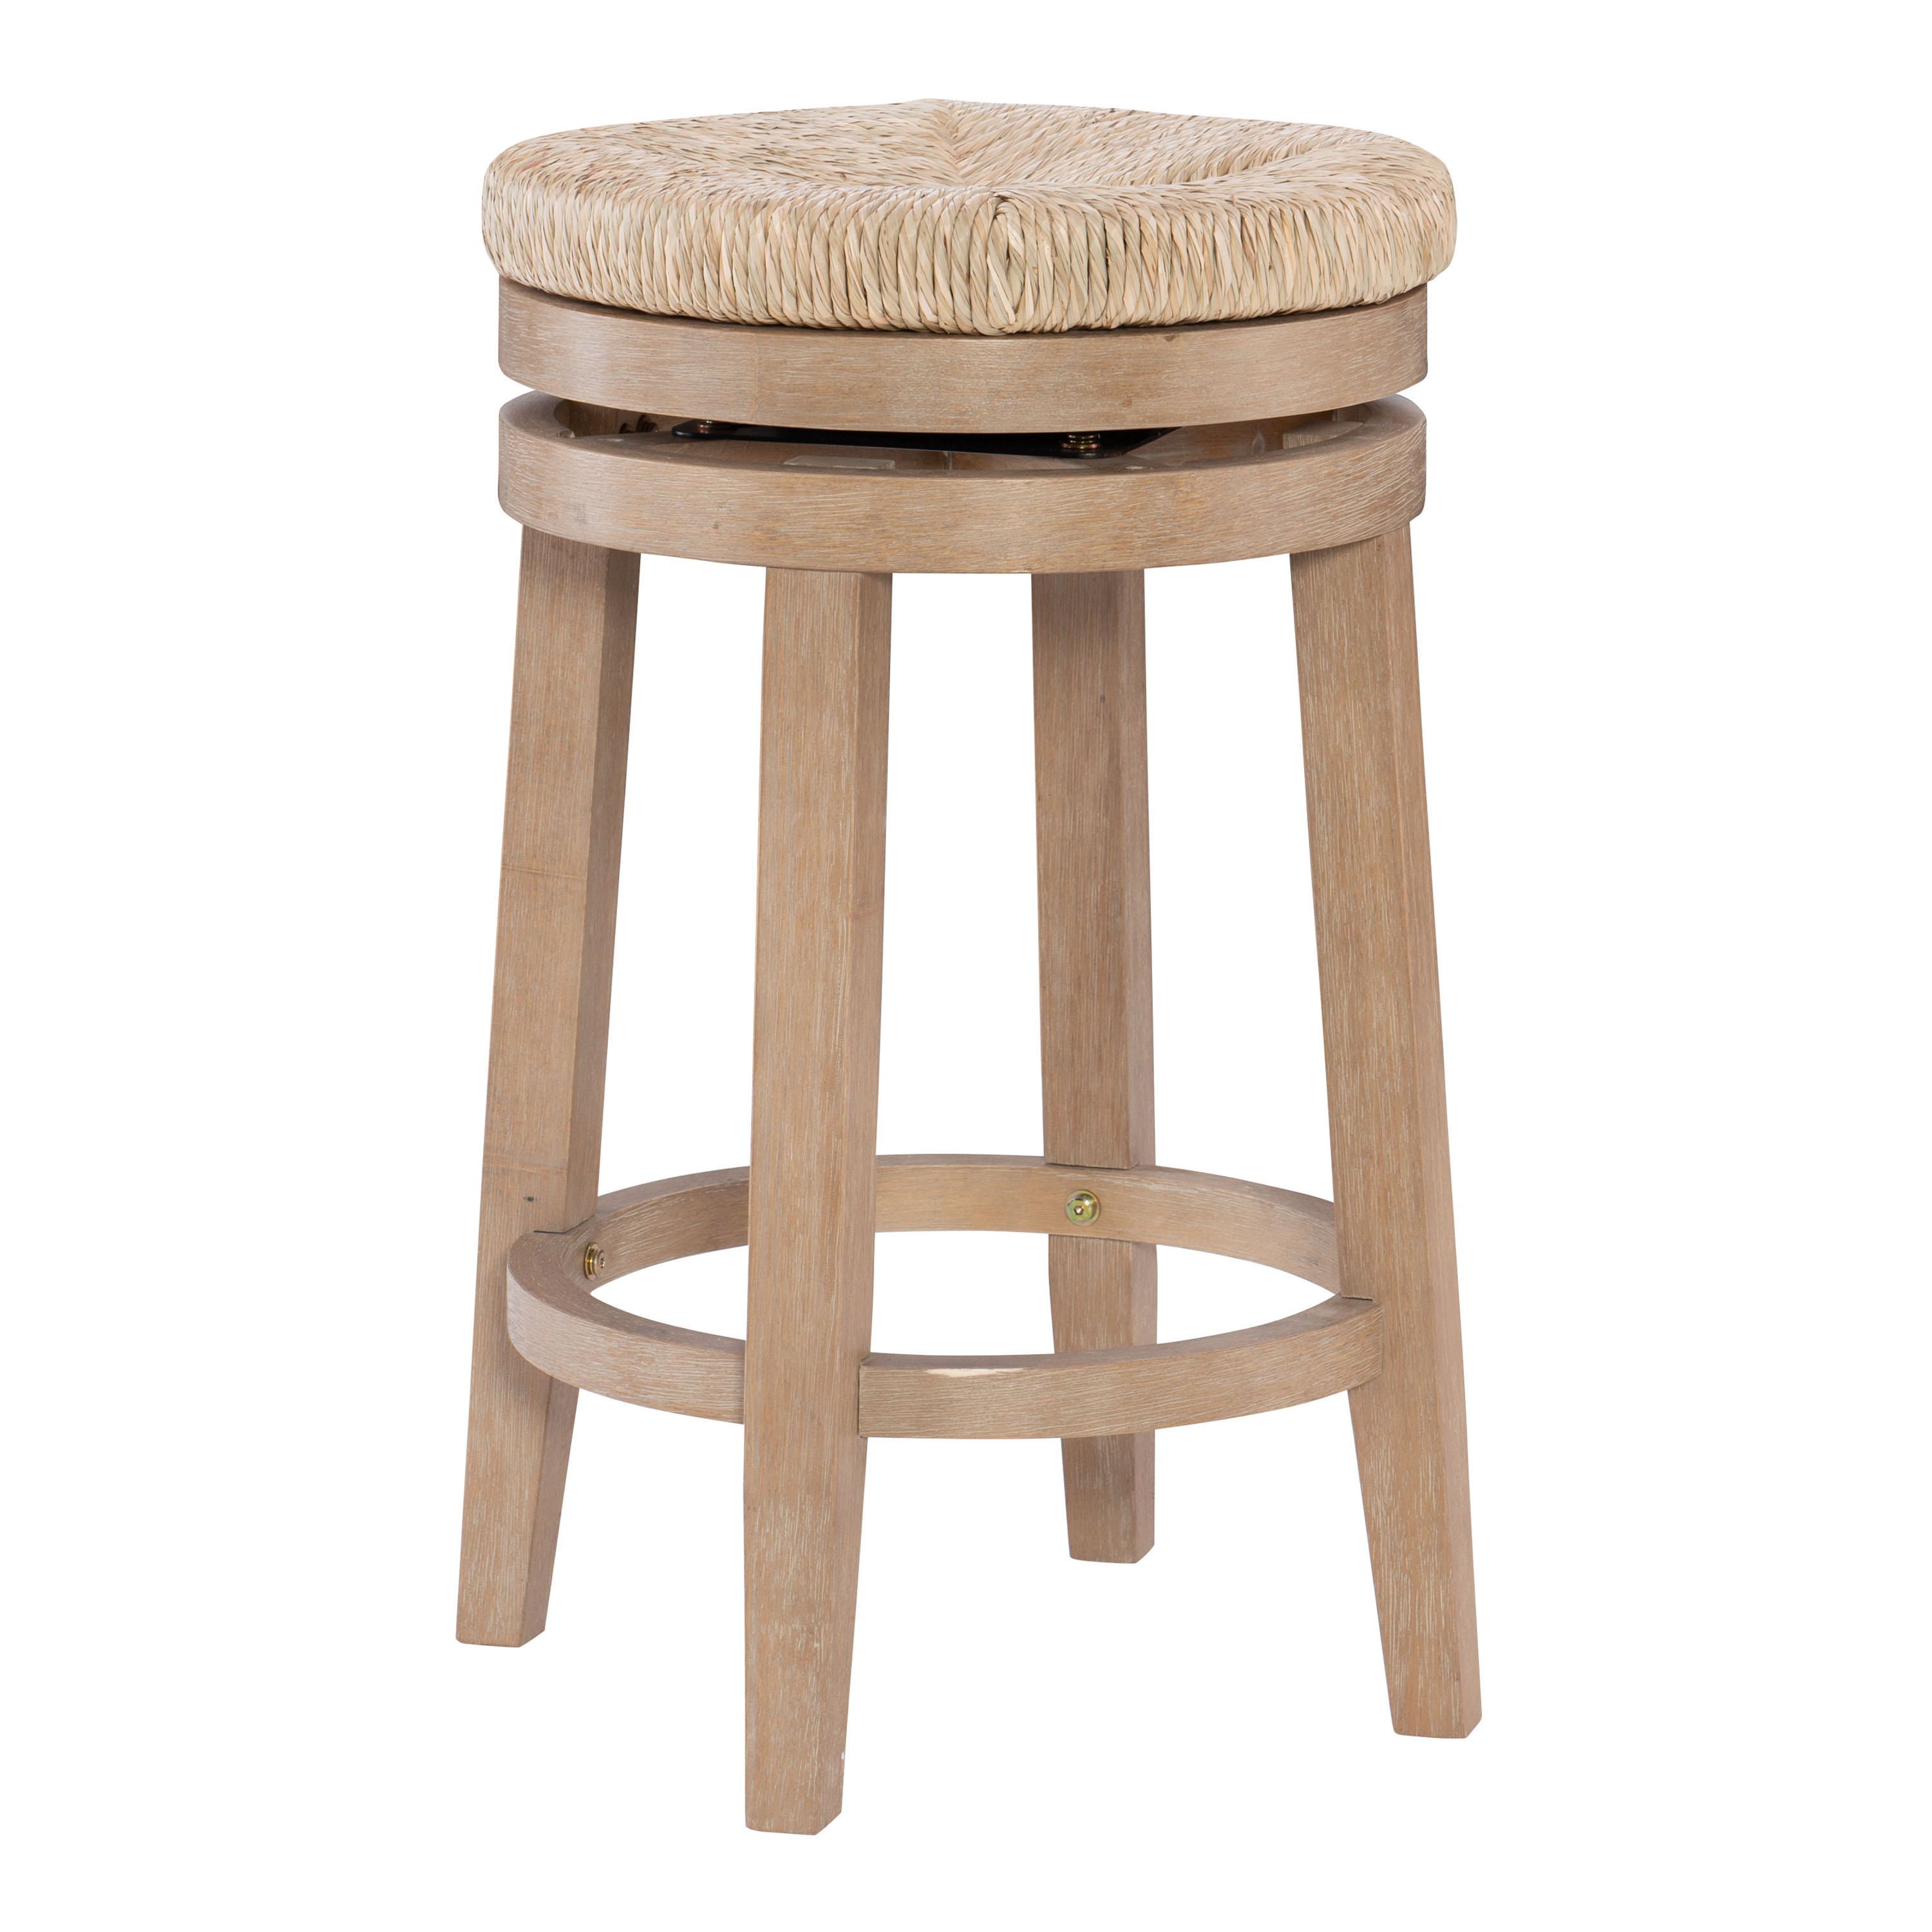 Claudia Natural Seagrass and Wood Swivel Counter Stool | World Market